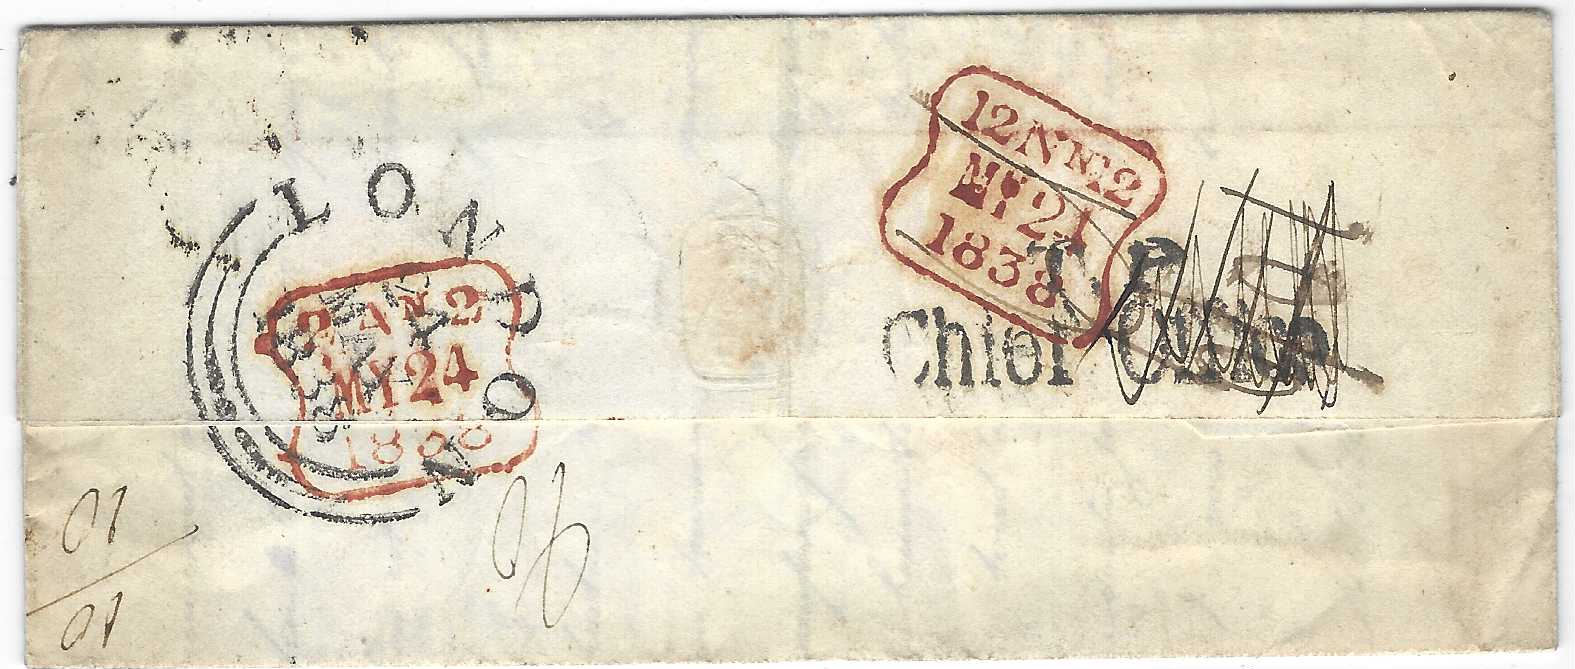 Great Britain 1838 (22 Mai) entire to London from Paris, bearing red framed arc FOREIGN PAID, redirected to Brompton and rated “3”d, reverse with unframed London, two-line T.P./ Chief Office handstamp and two red dated handstamps.